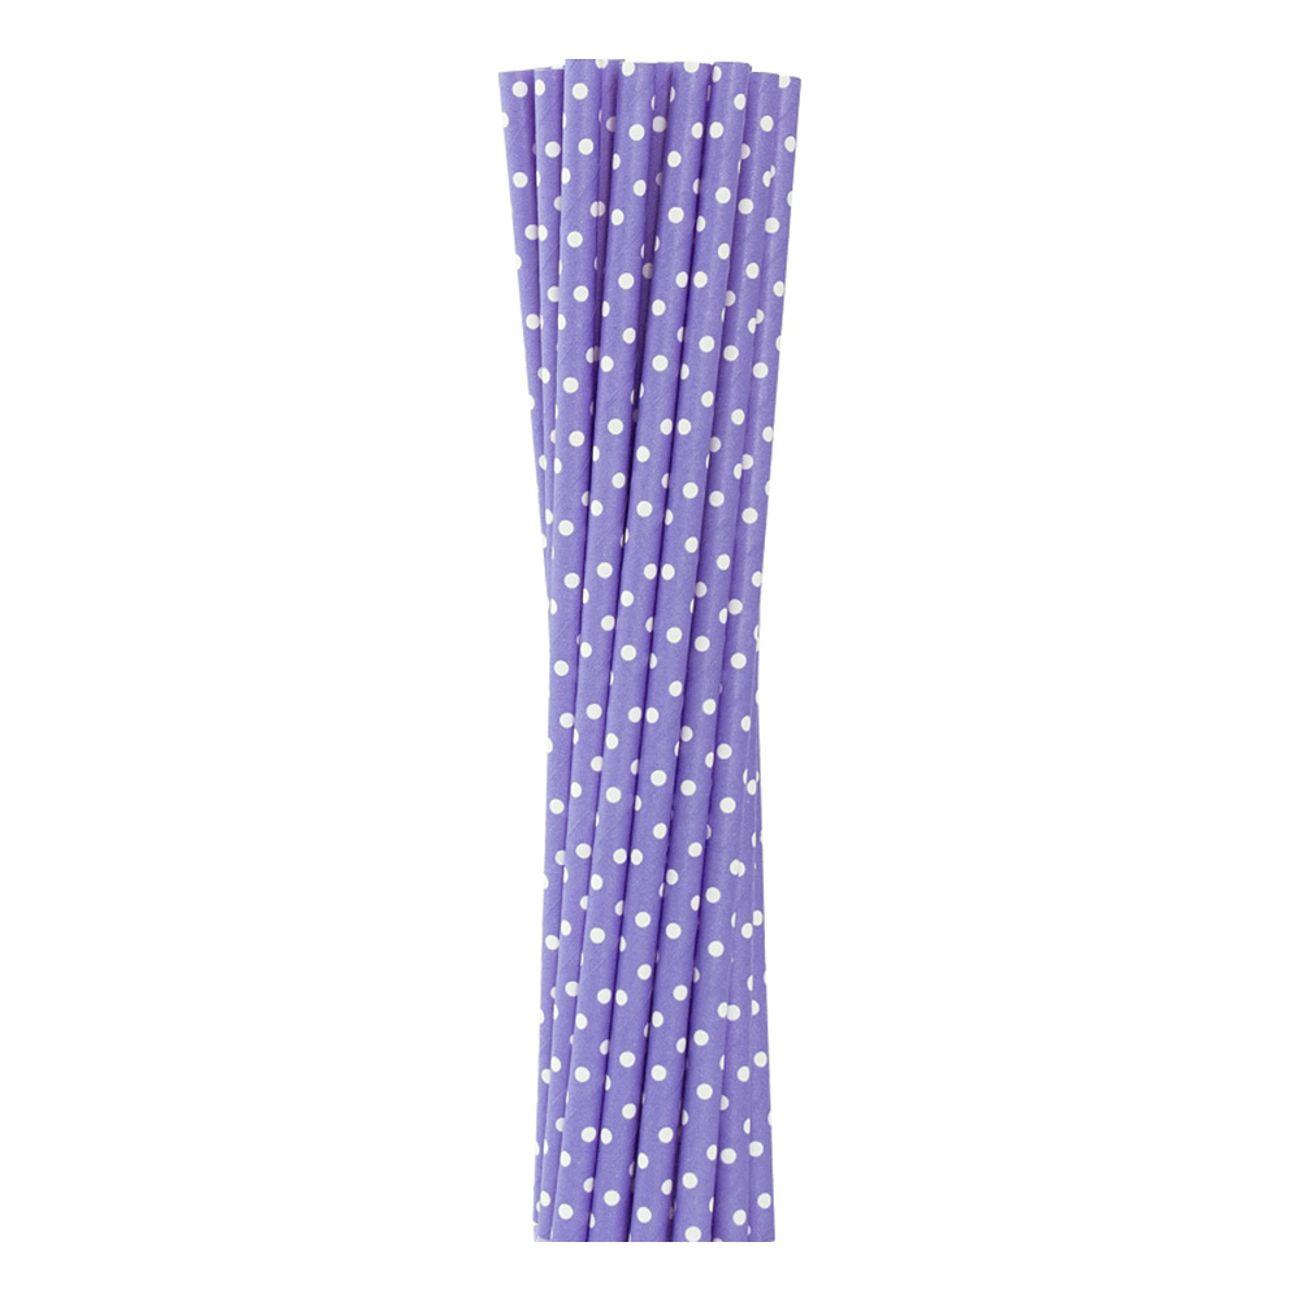 papperssugror-purple-in-white-dots-6x197-mm--12-pcs-1